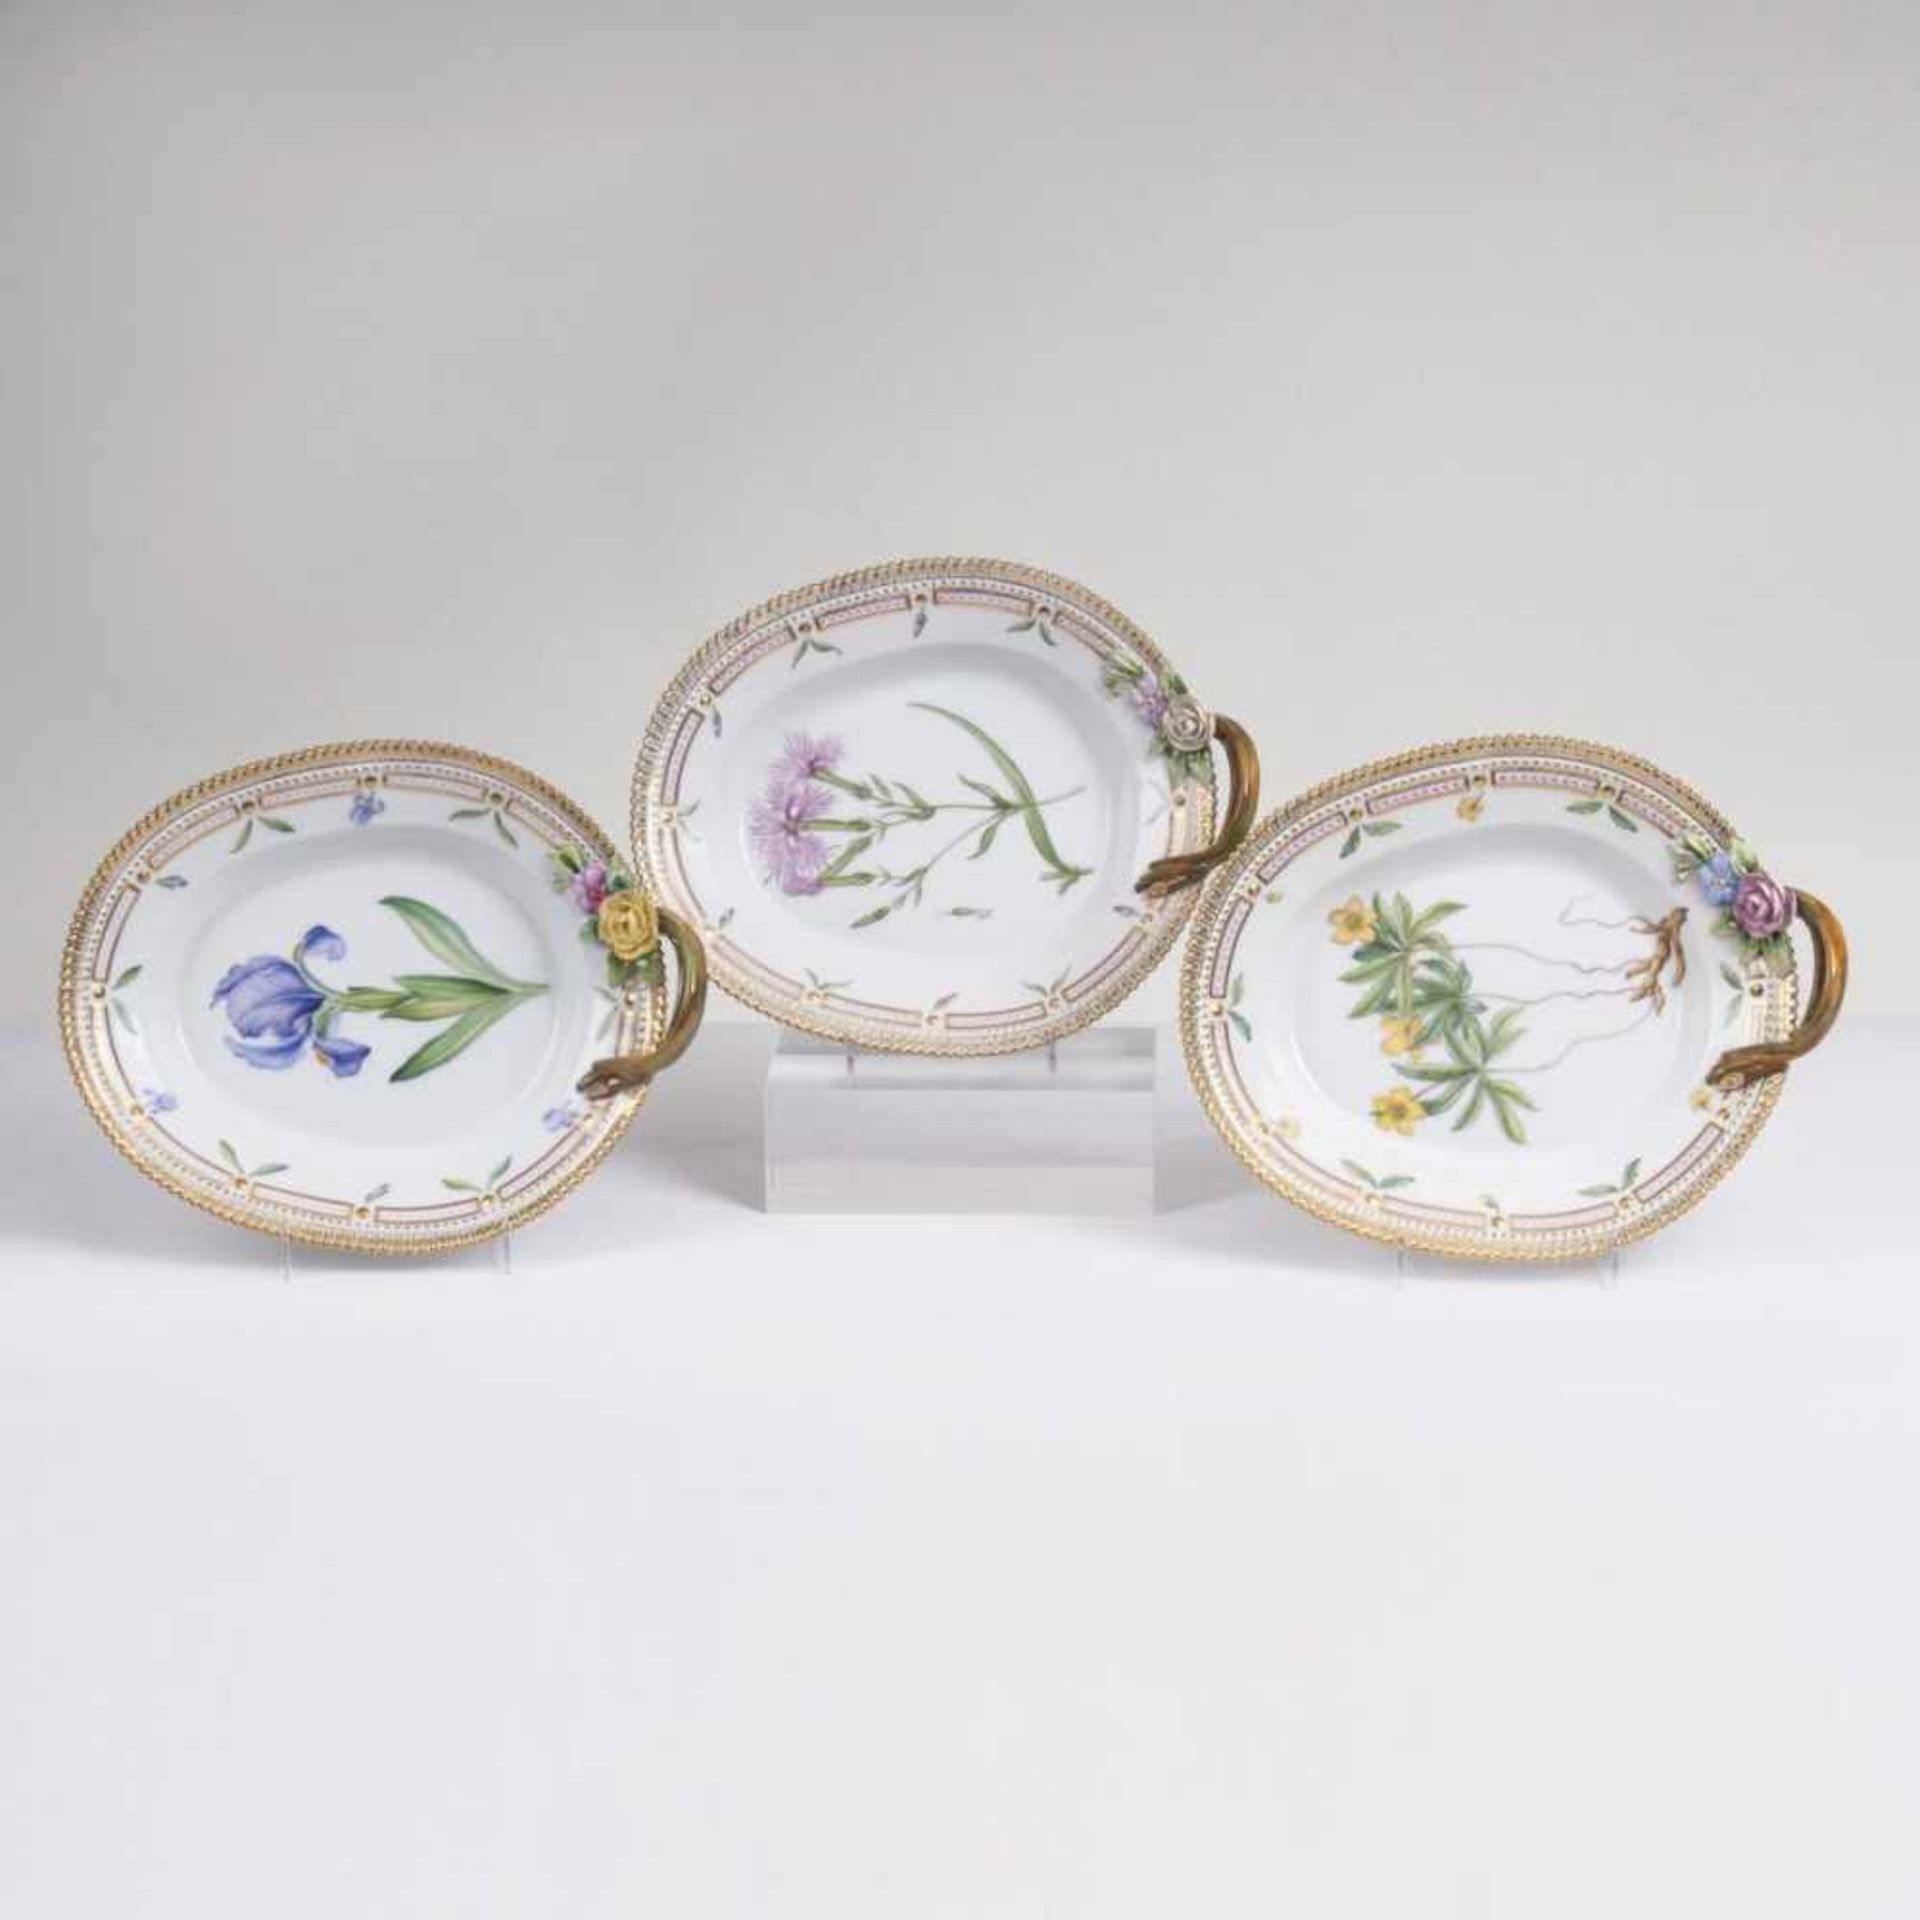 Three oval Flora Danica Dishes with Branch Handles and Botanical SpecimensRoyal Copenhagen, 1990s.